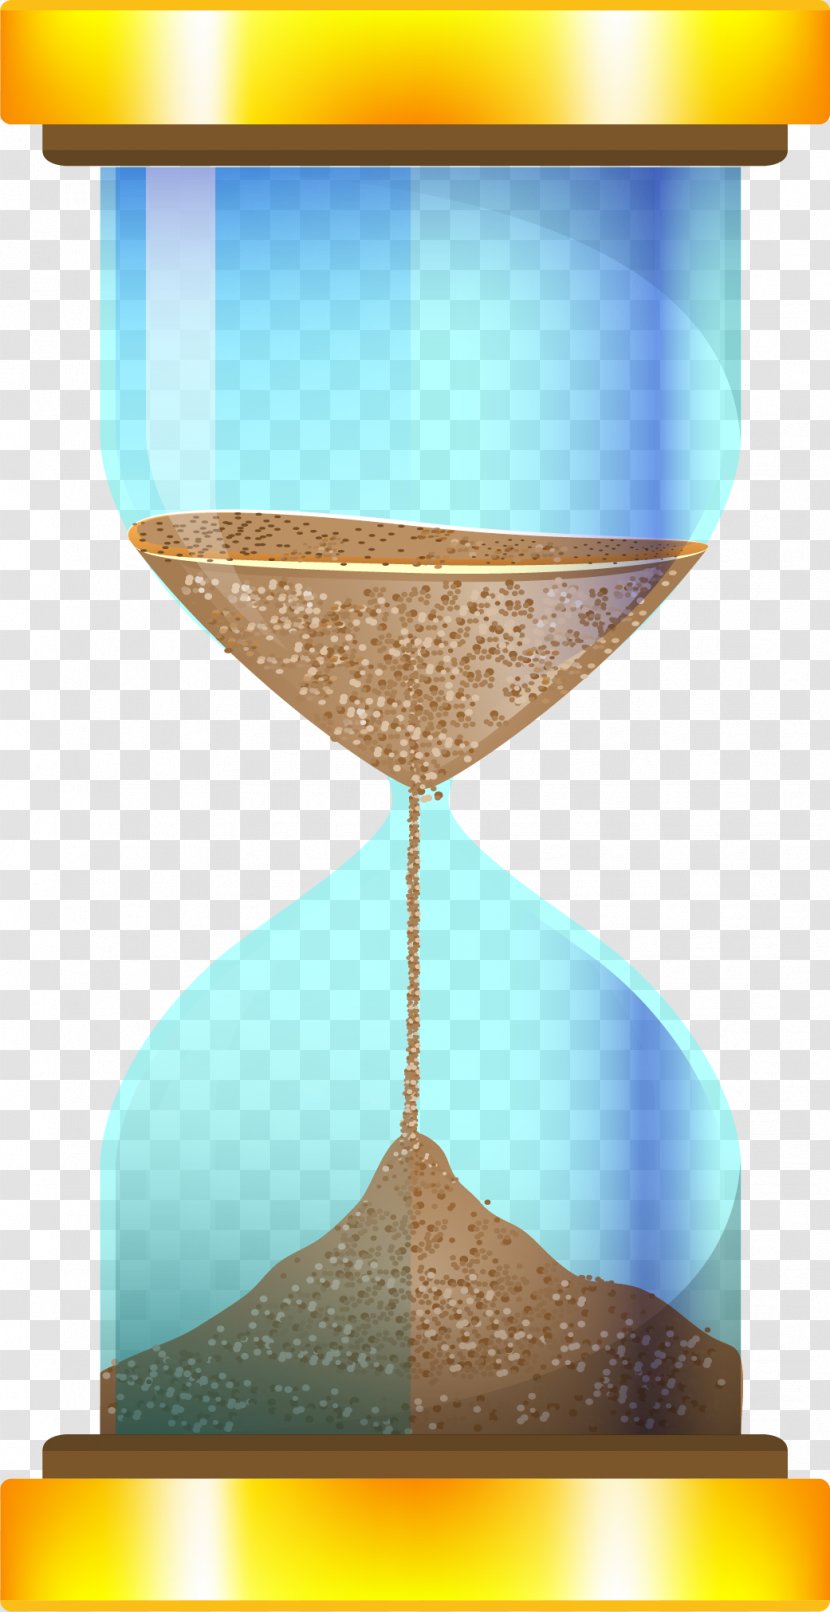 Hourglass Transparency And Translucency Funnel - Time - Transparent Glass Transparent PNG